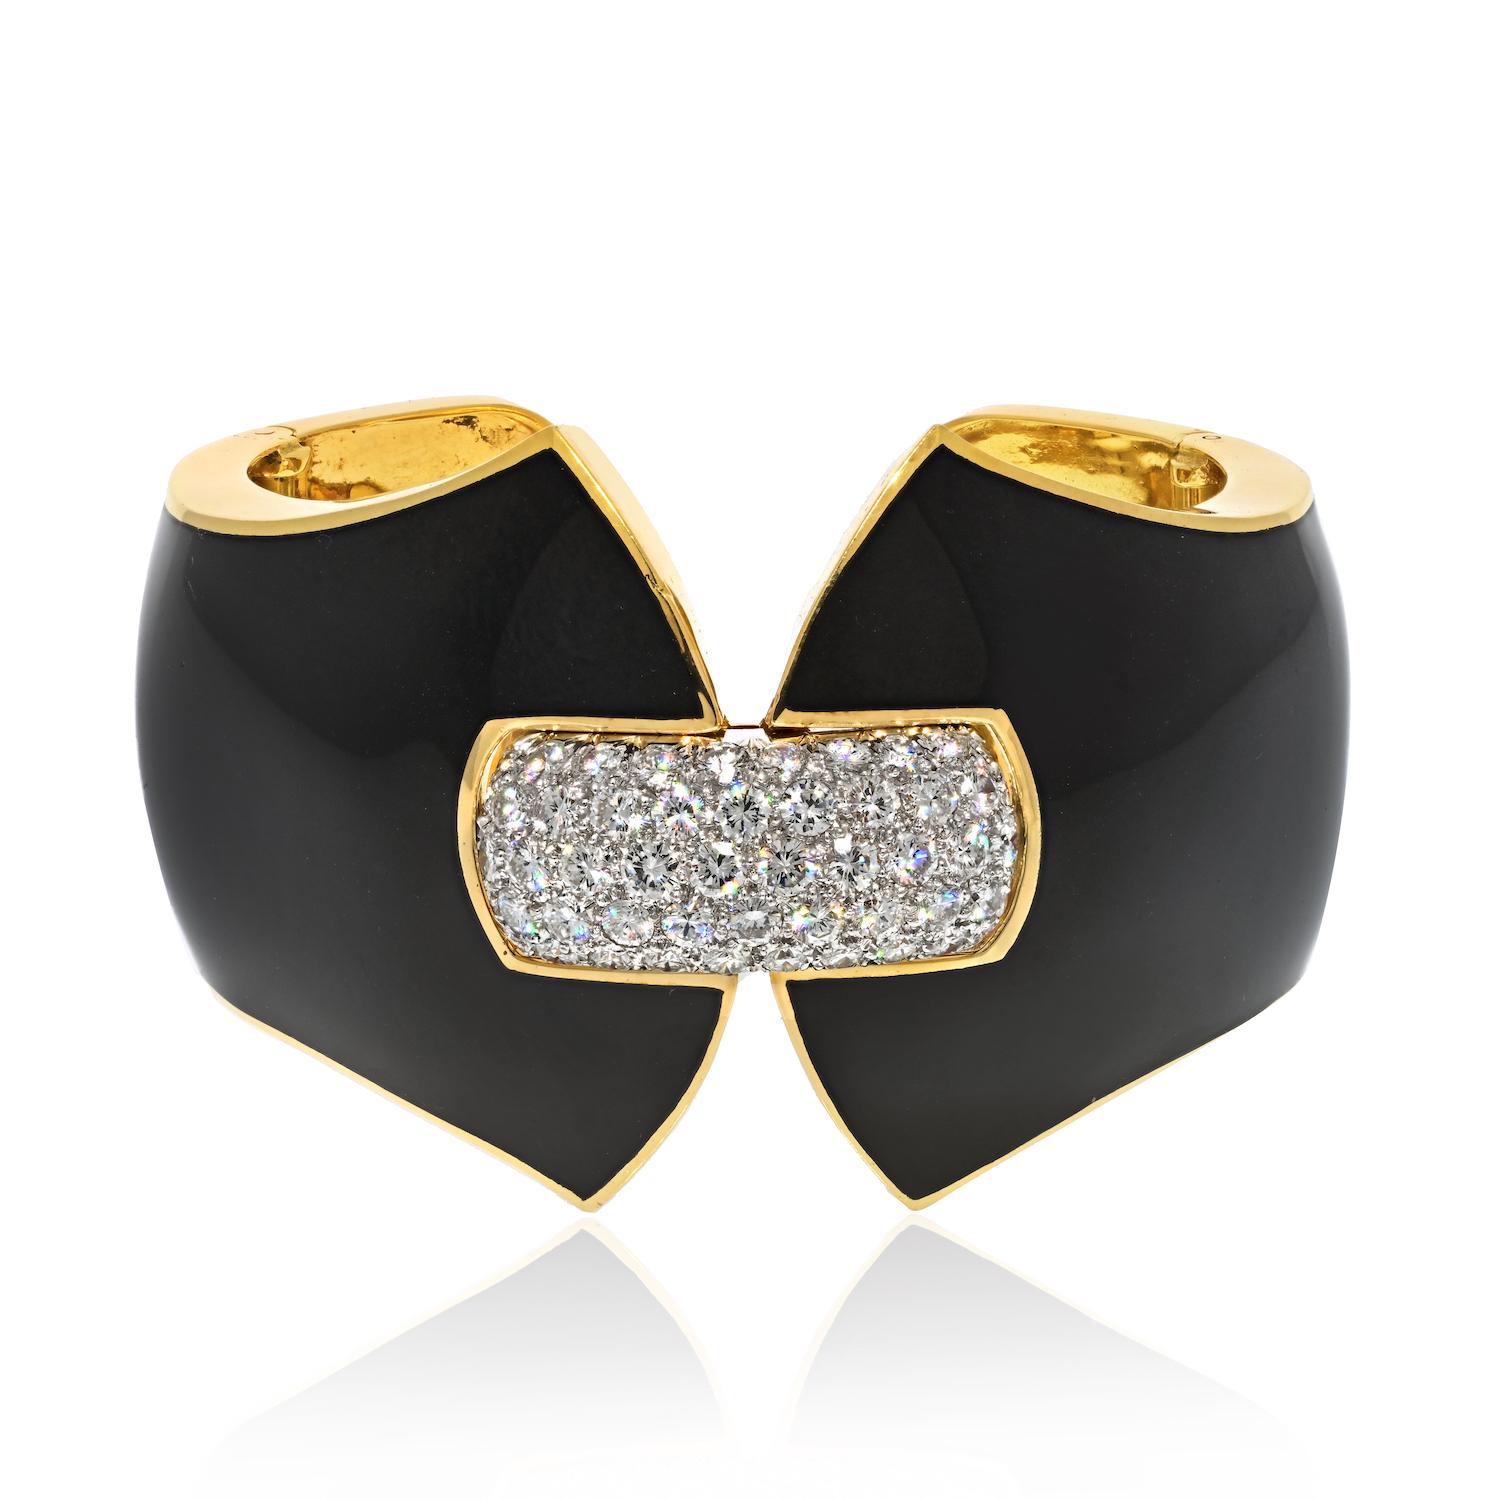 From David Webb's iconic Manhattan Minimalism collection, this exquisite black enamel and diamond cuff bracelet is a true work of art. 

Expertly crafted in 18 karat yellow gold and platinum, this bracelet features 53 round brilliant cut diamonds